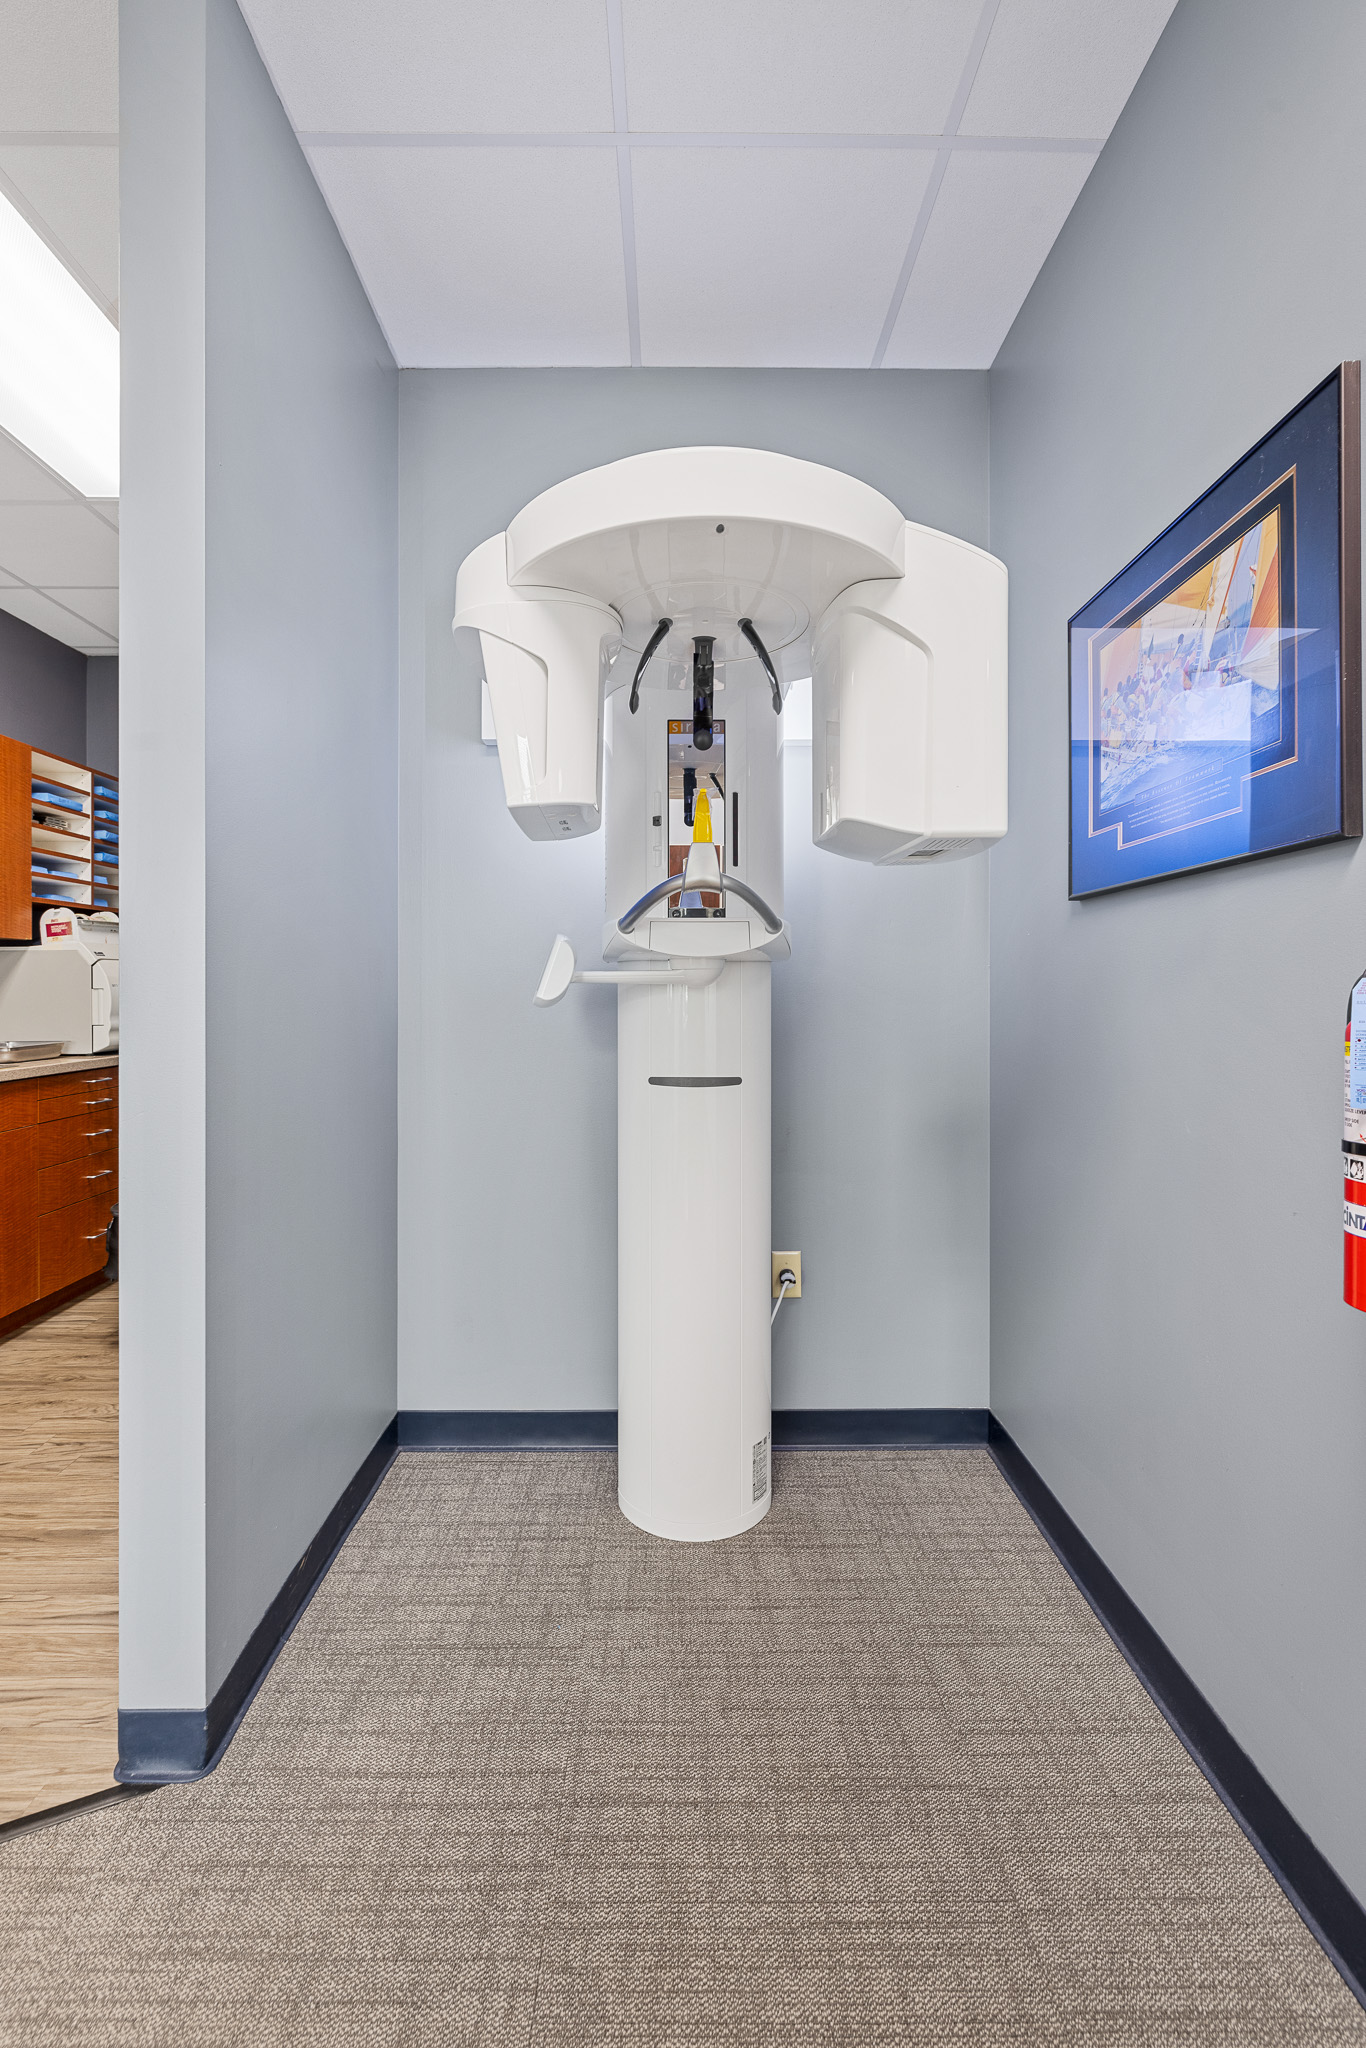 State-of-the-art 3D x-ray machine in Dr. Kevin Burgdorf's office, emphasizing the high-tech diagnostic tools available for patients.